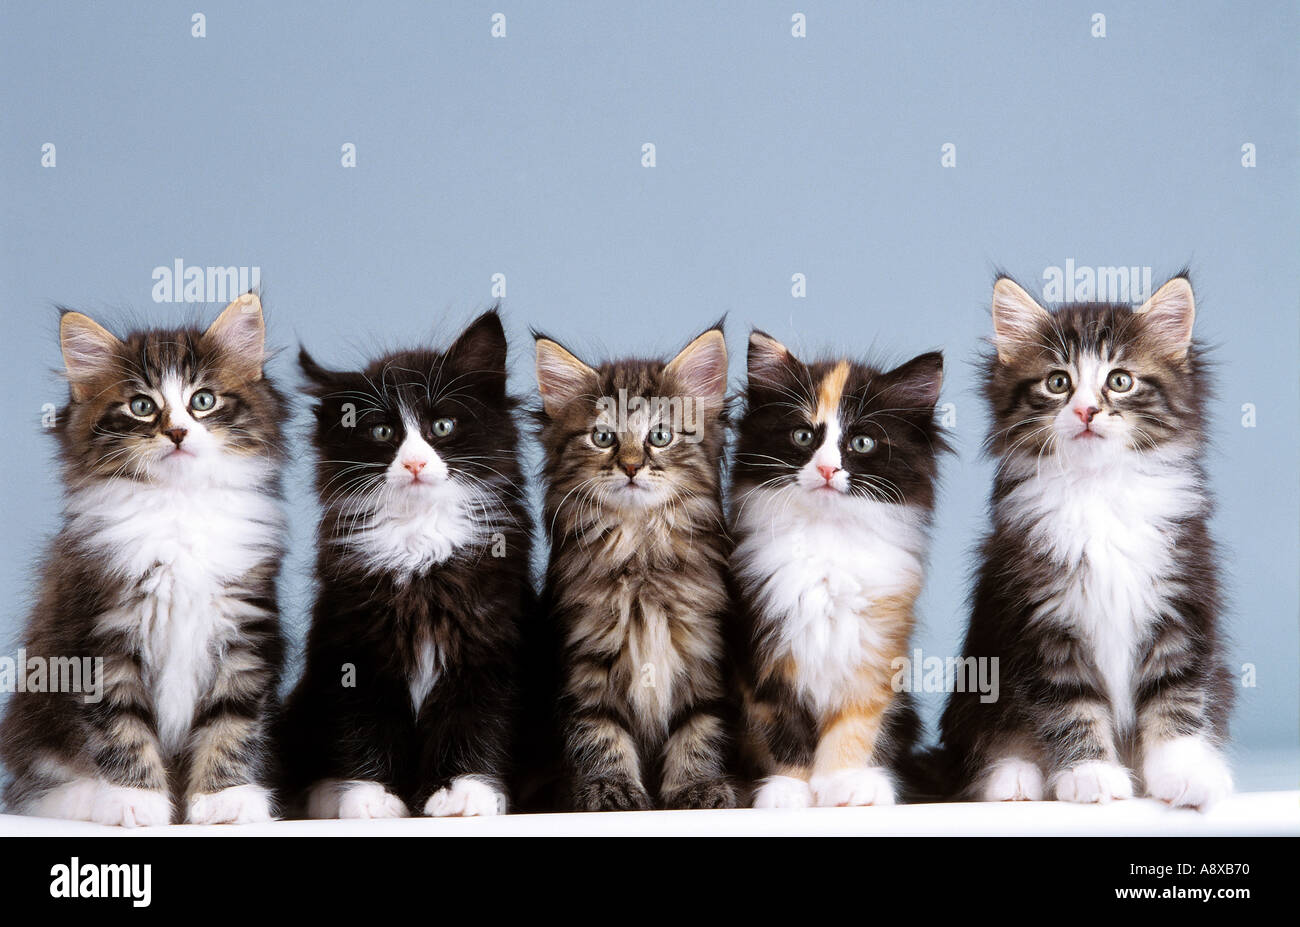 Norwegian Forest Cat. Five kittens sitting in line. Studio picture against a light blue background Stock Photo